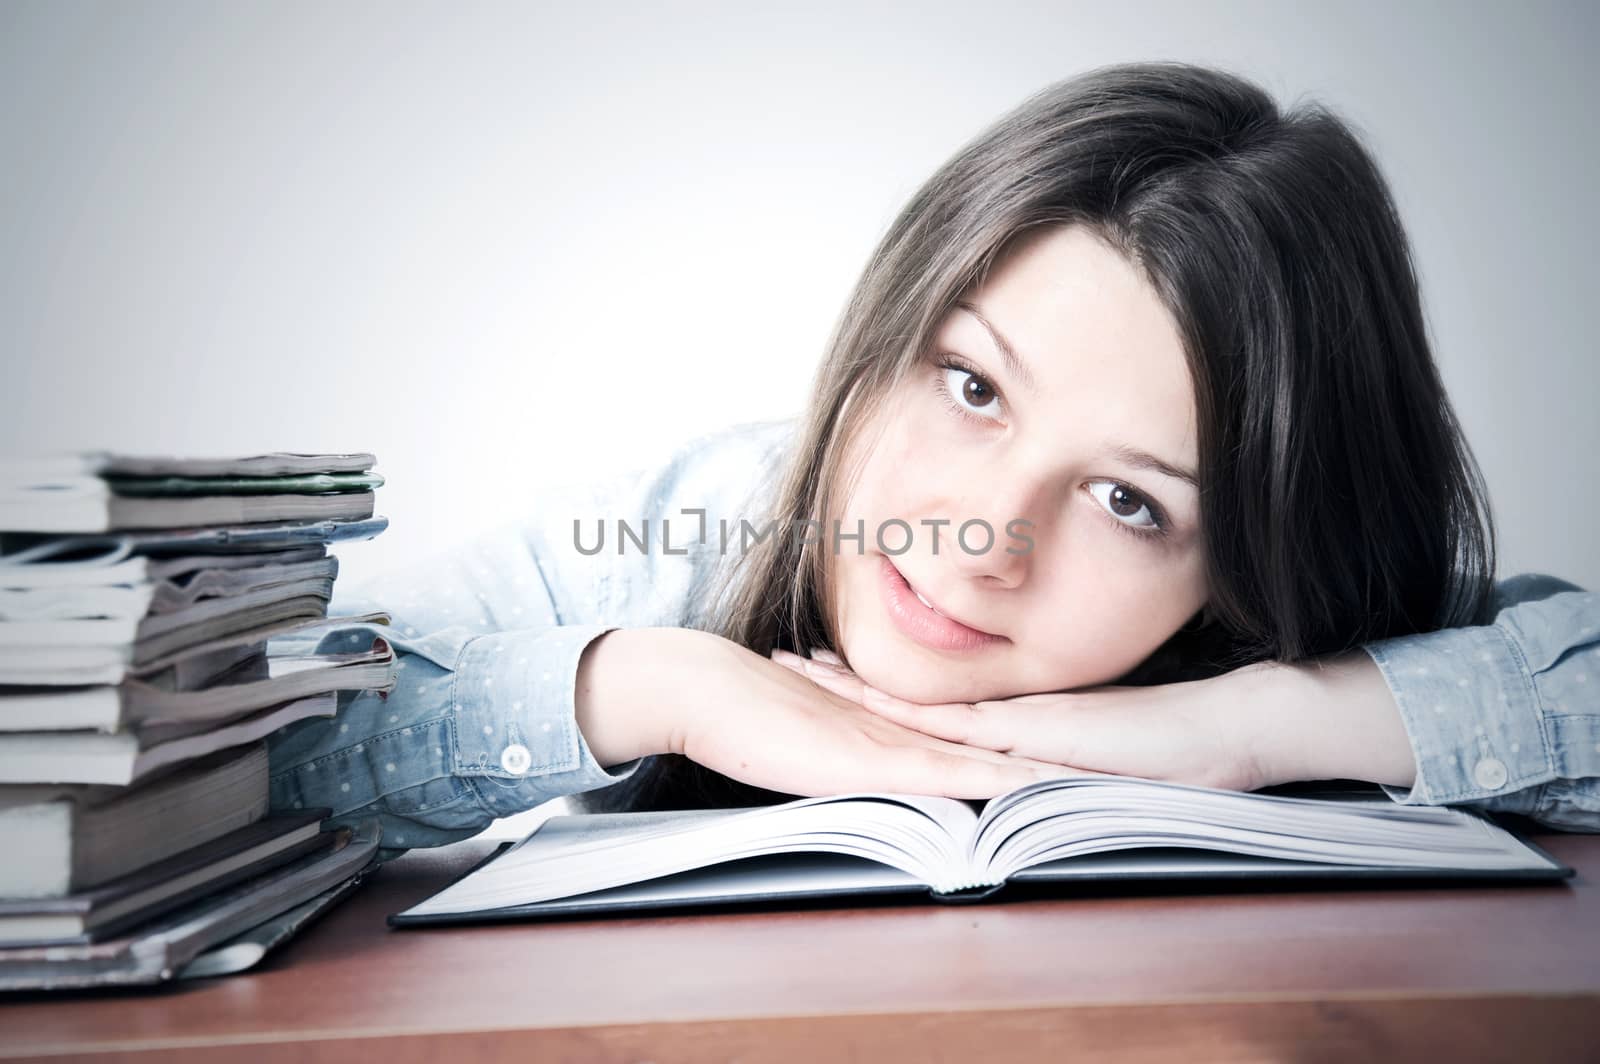 Cute smart young girl studying. Education conceptual image.